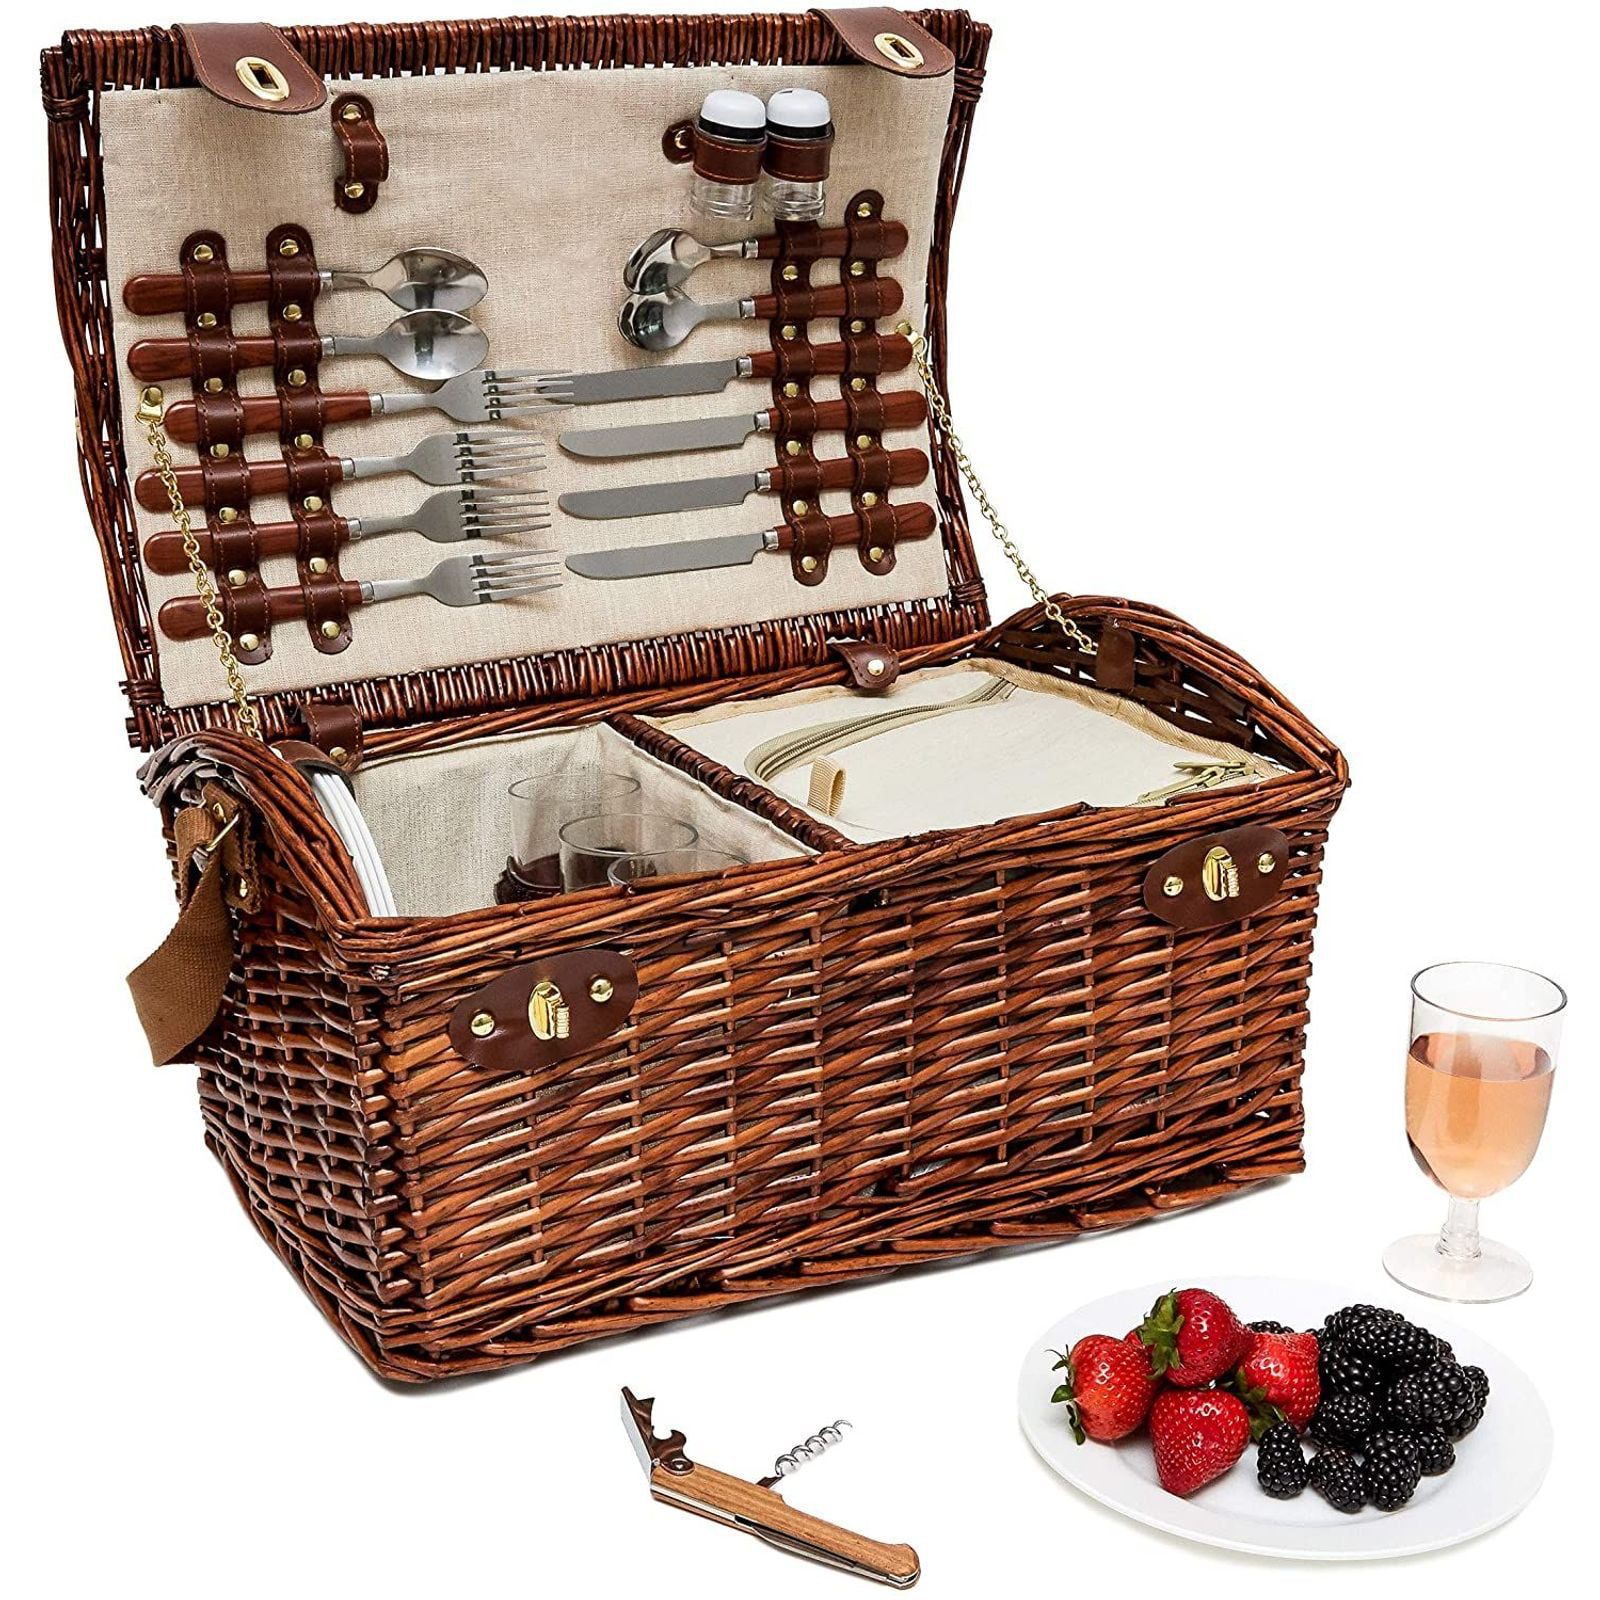 Deluxe 2 Person Traditional Wicker Picnic Basket Hamper with Cutlery and more 